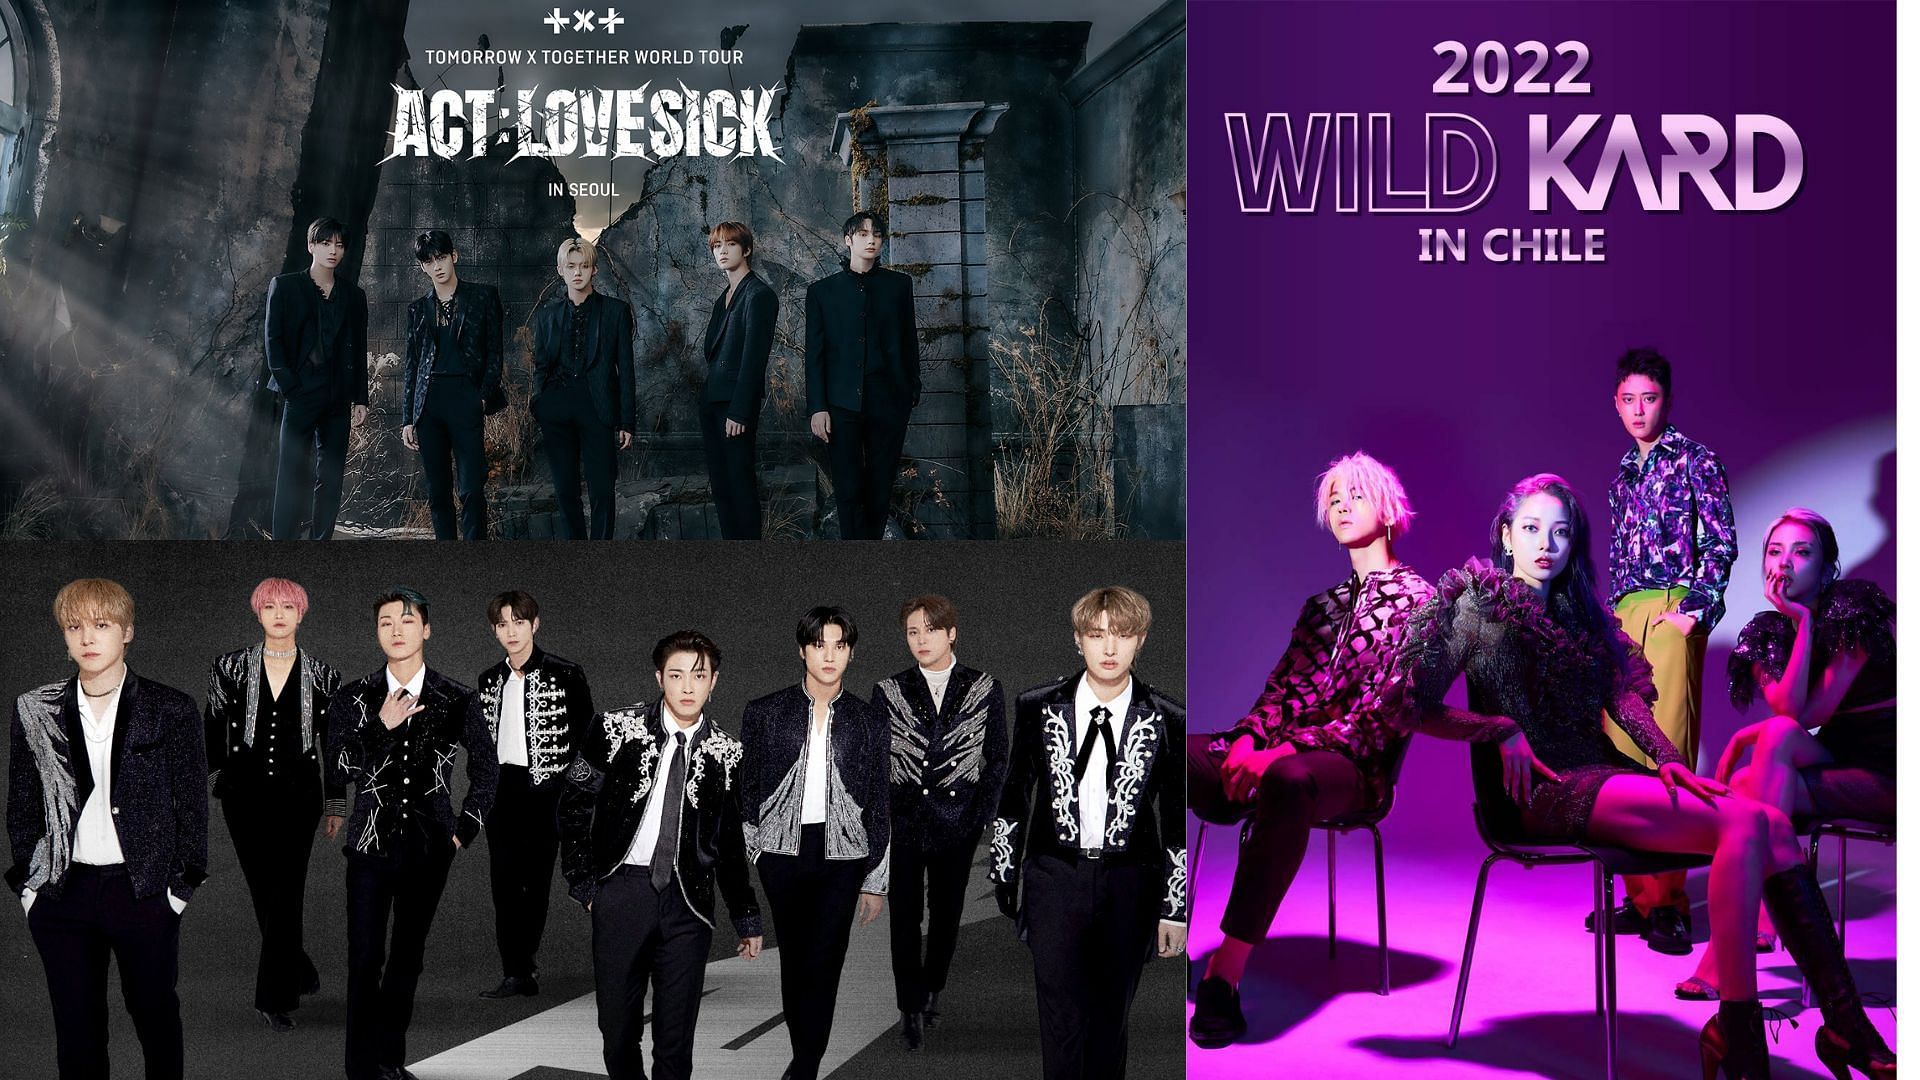 TXT, ATEEZ, and KARD (Images via @weverseofficial/Twitter, @ATEEZofficial/Twitter, and @KARD_Official/Twitter)